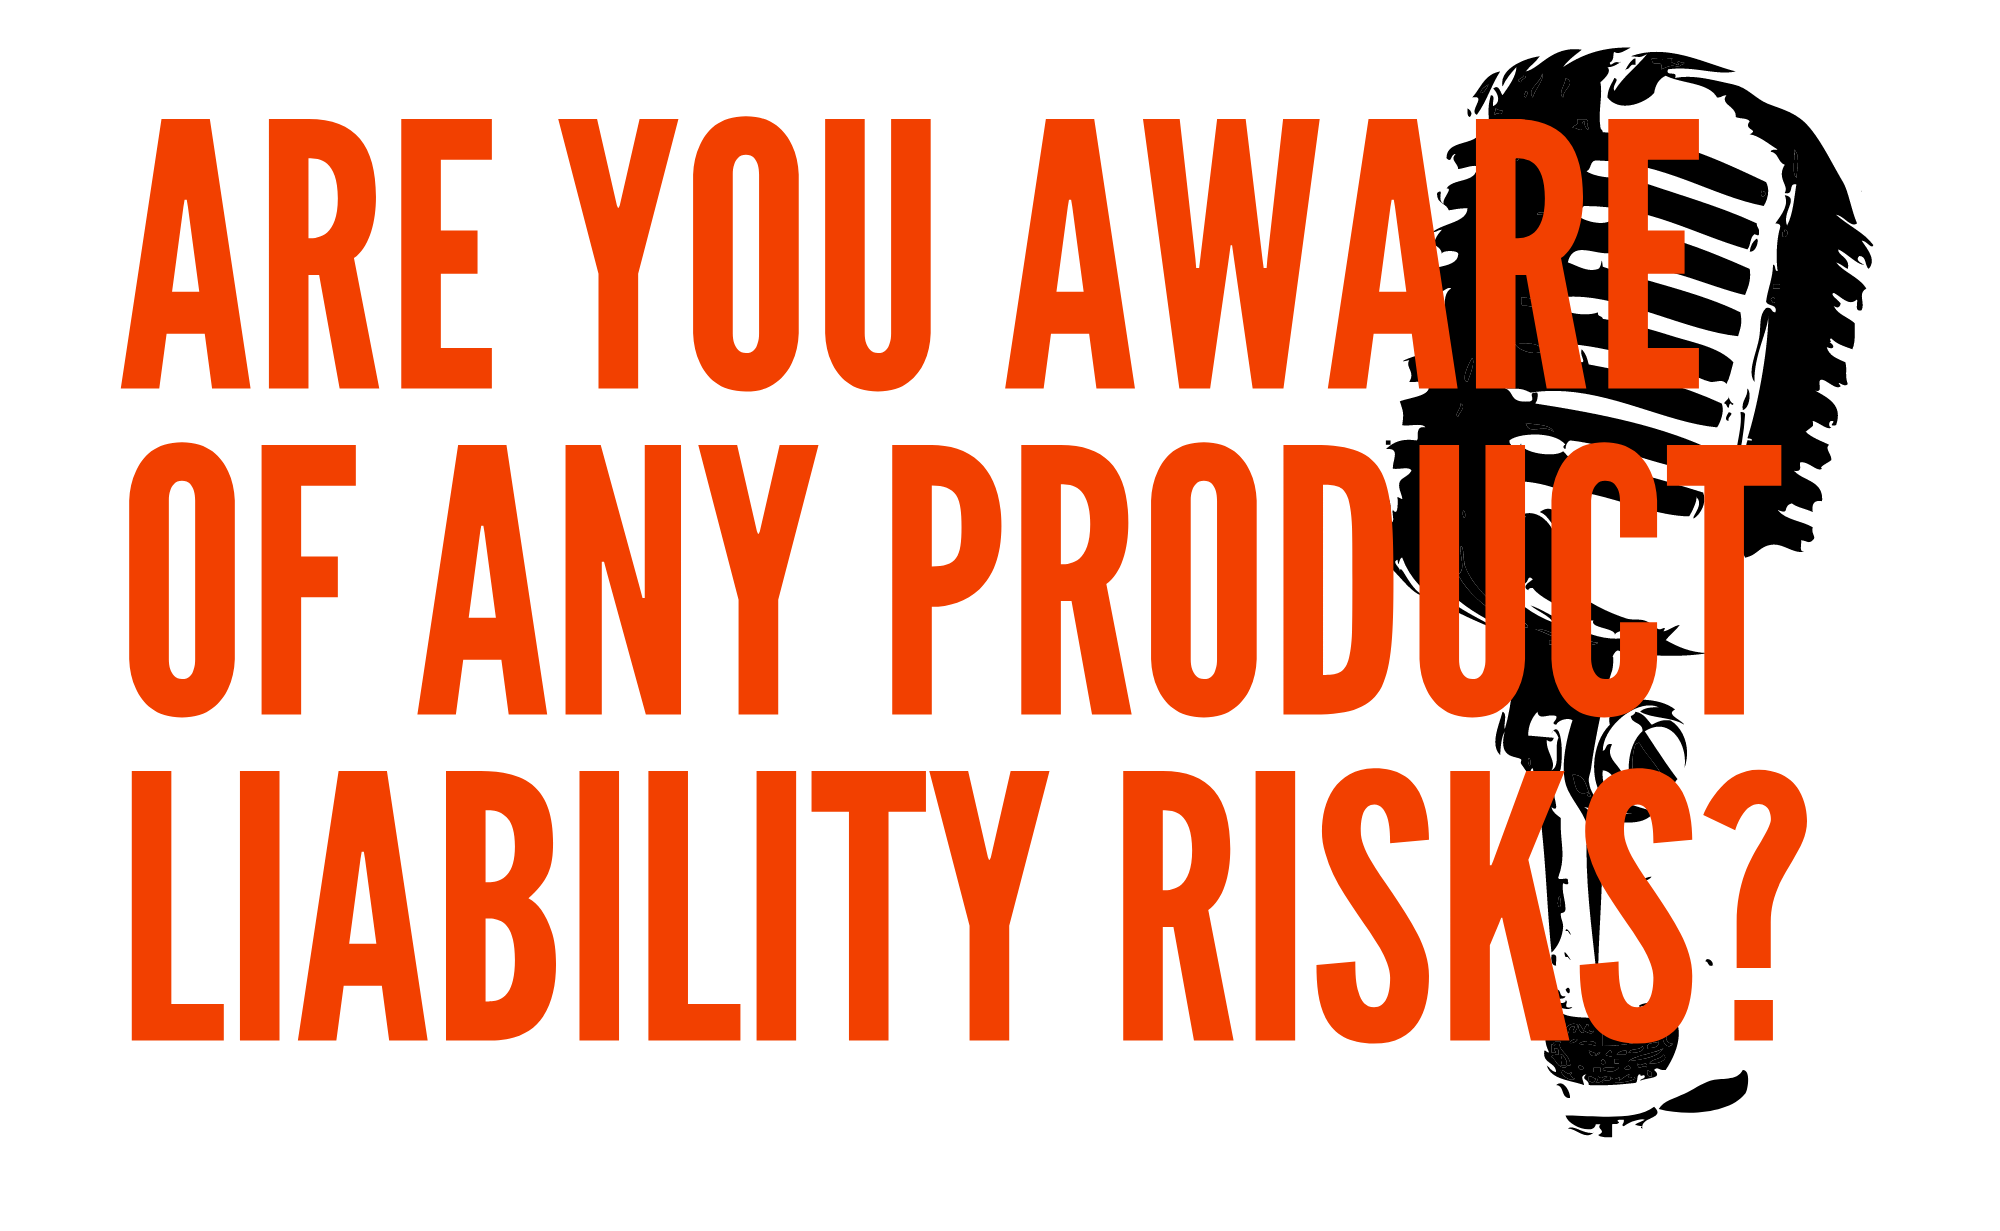 After The Pitch - Are You Aware of Any Product Liability Risks